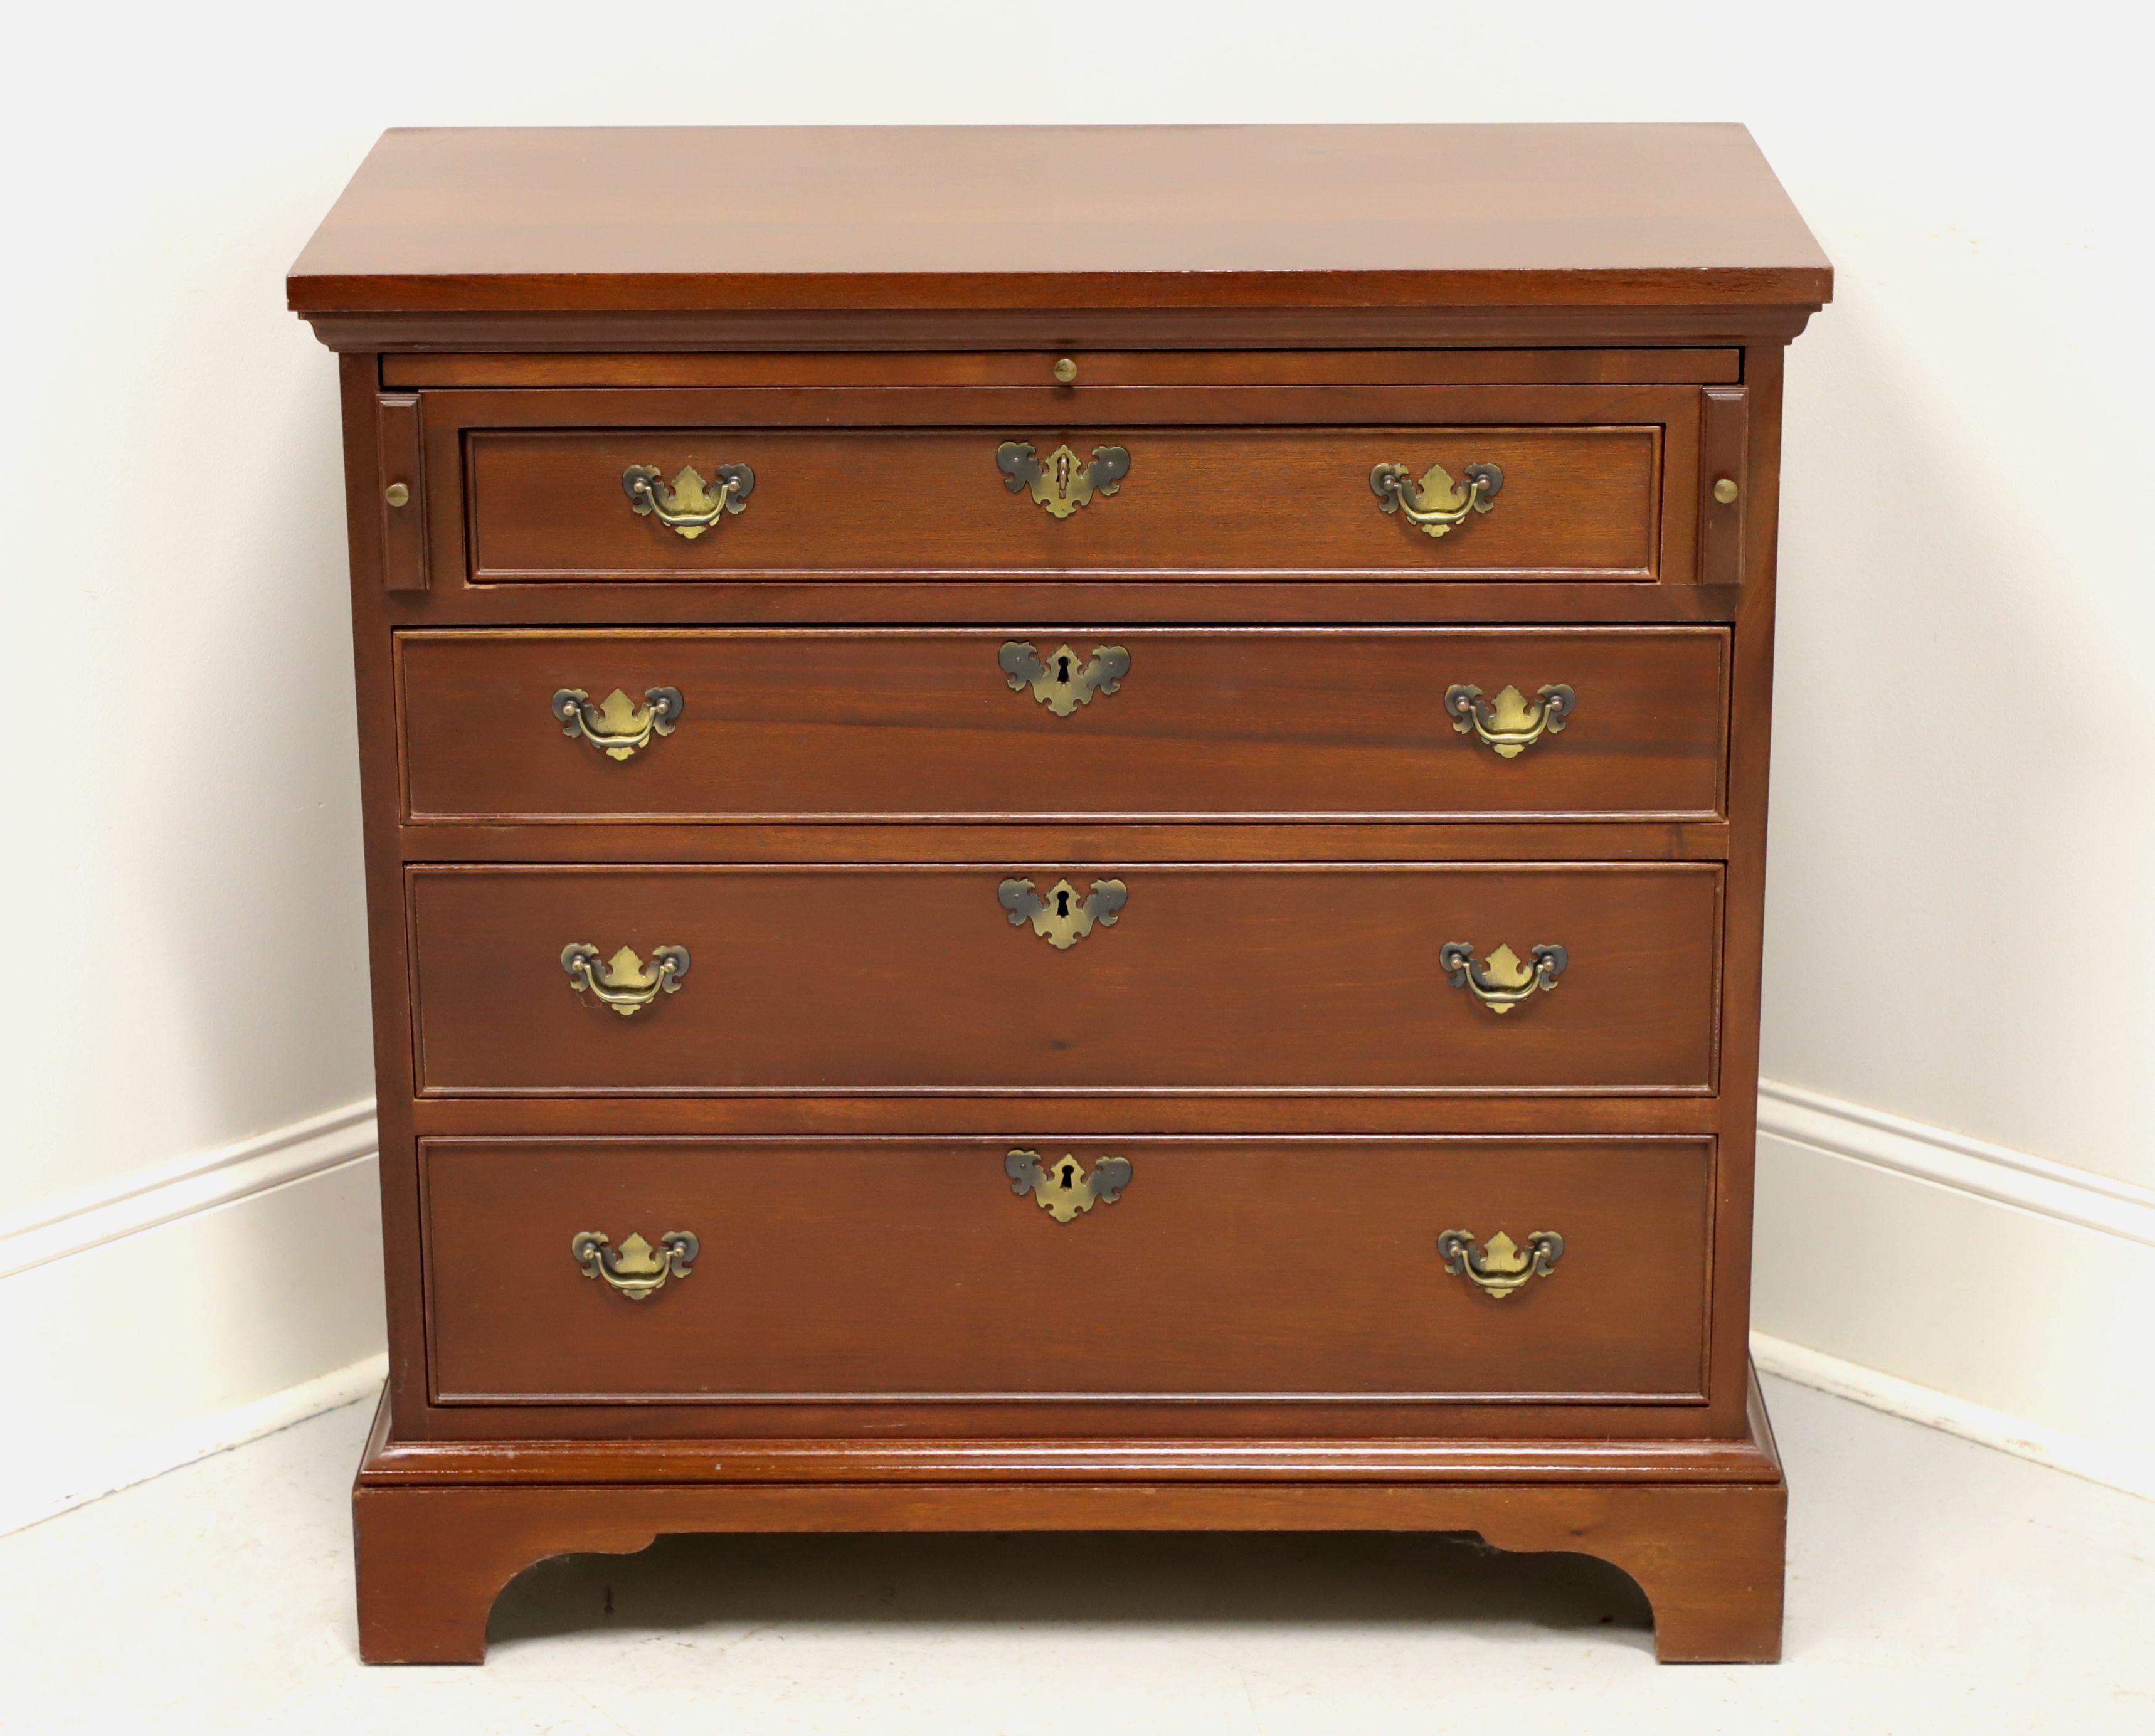 A Chippendale style Mary Washington silver / serving chest by Craftique, of Mebane, North Carolina, USA. Solid mahogany, brass hardware and bracket feet. Features a pull out mahogany serving surface with pull out supports, four various size lockable